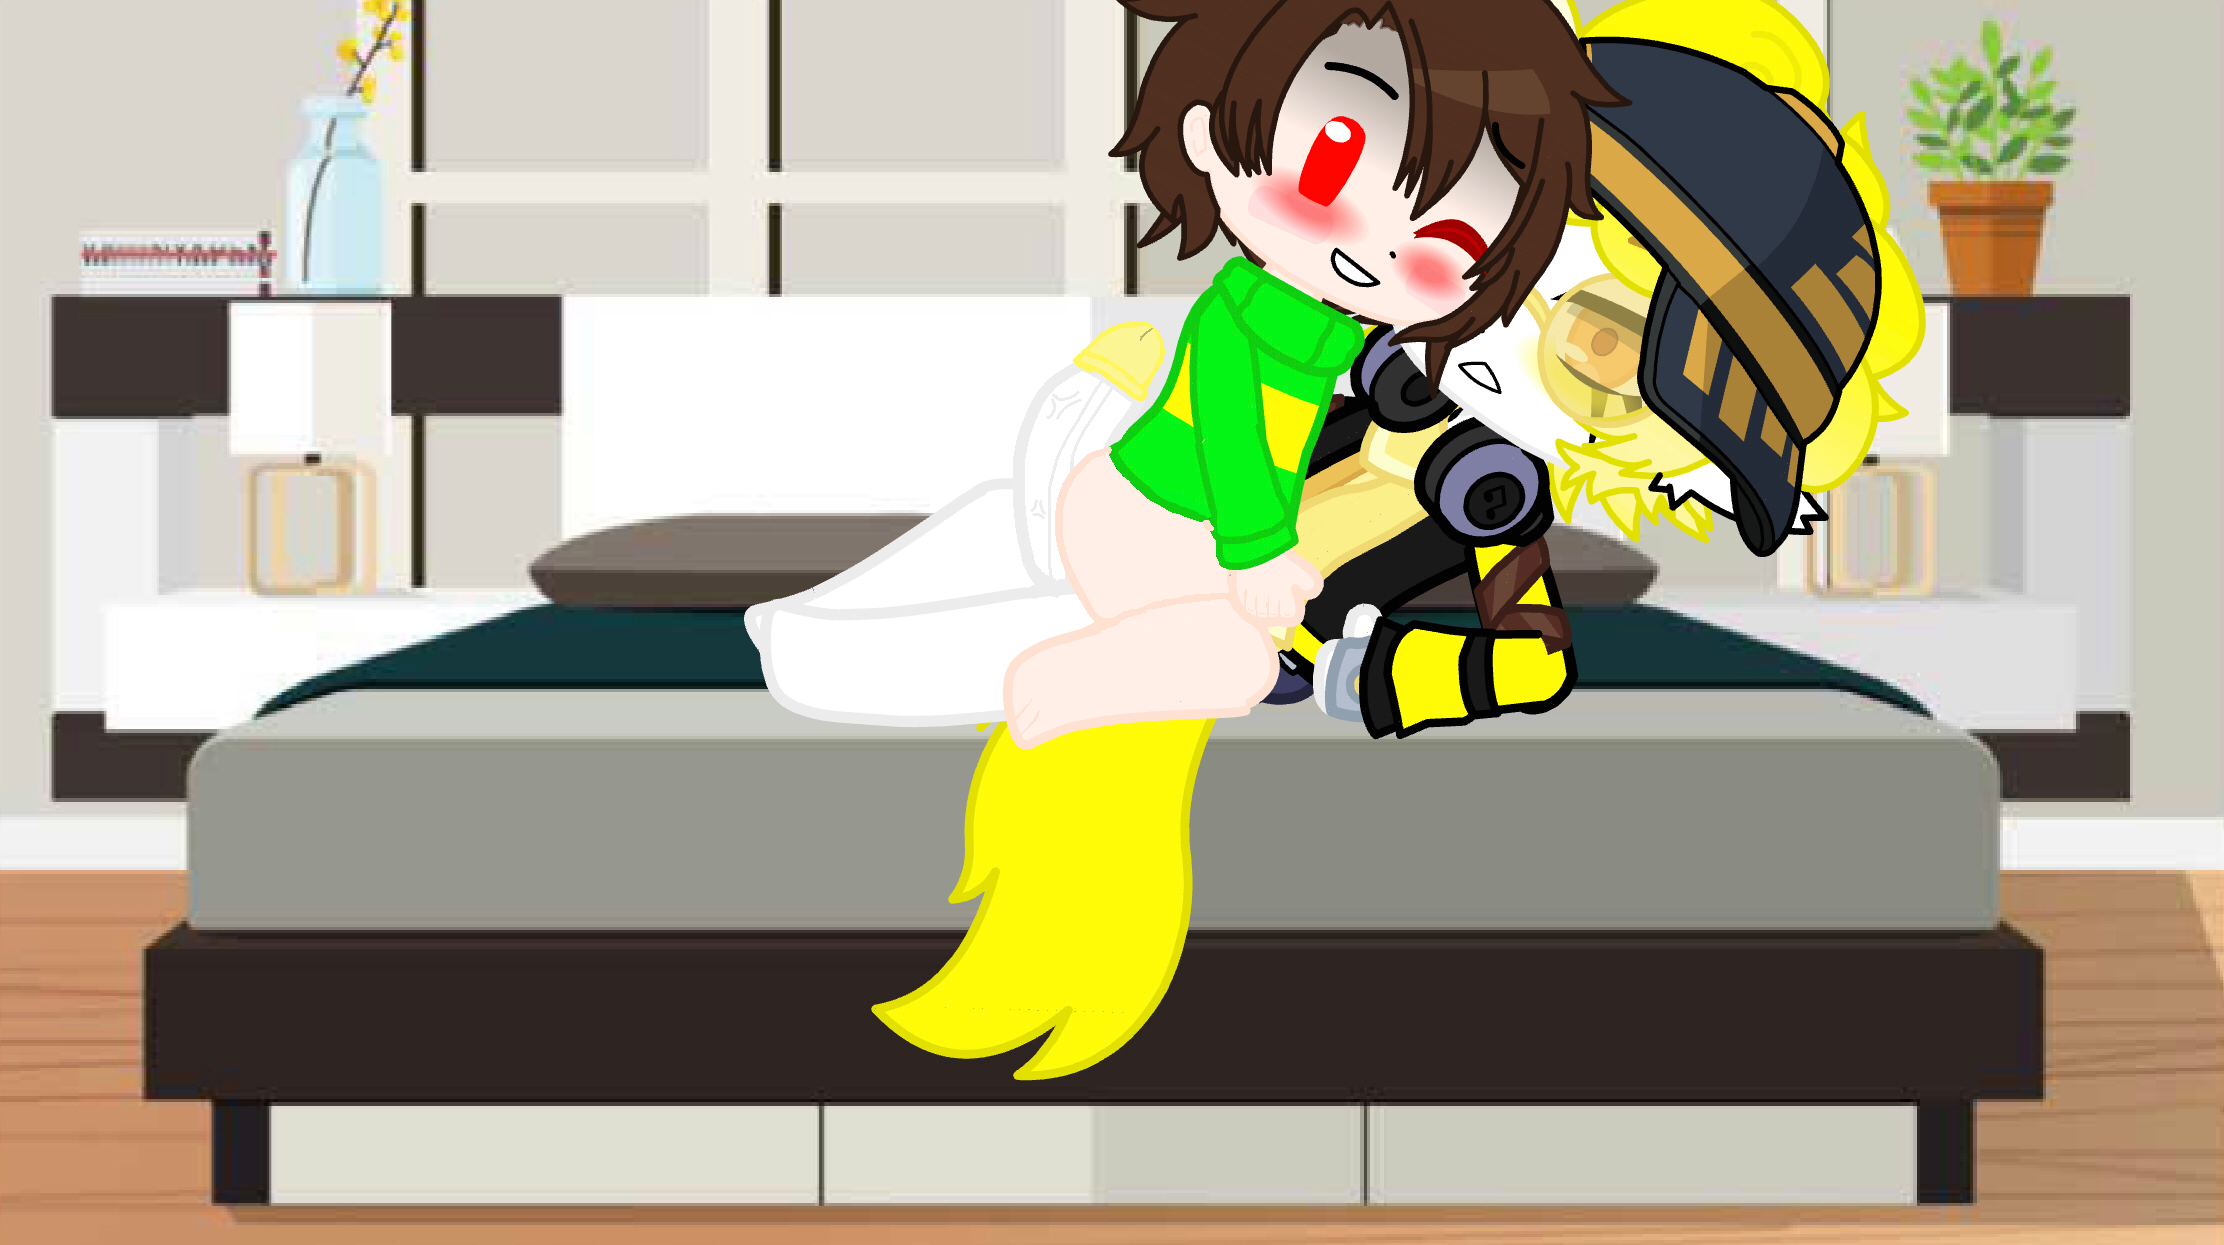 Chara in a playful mood